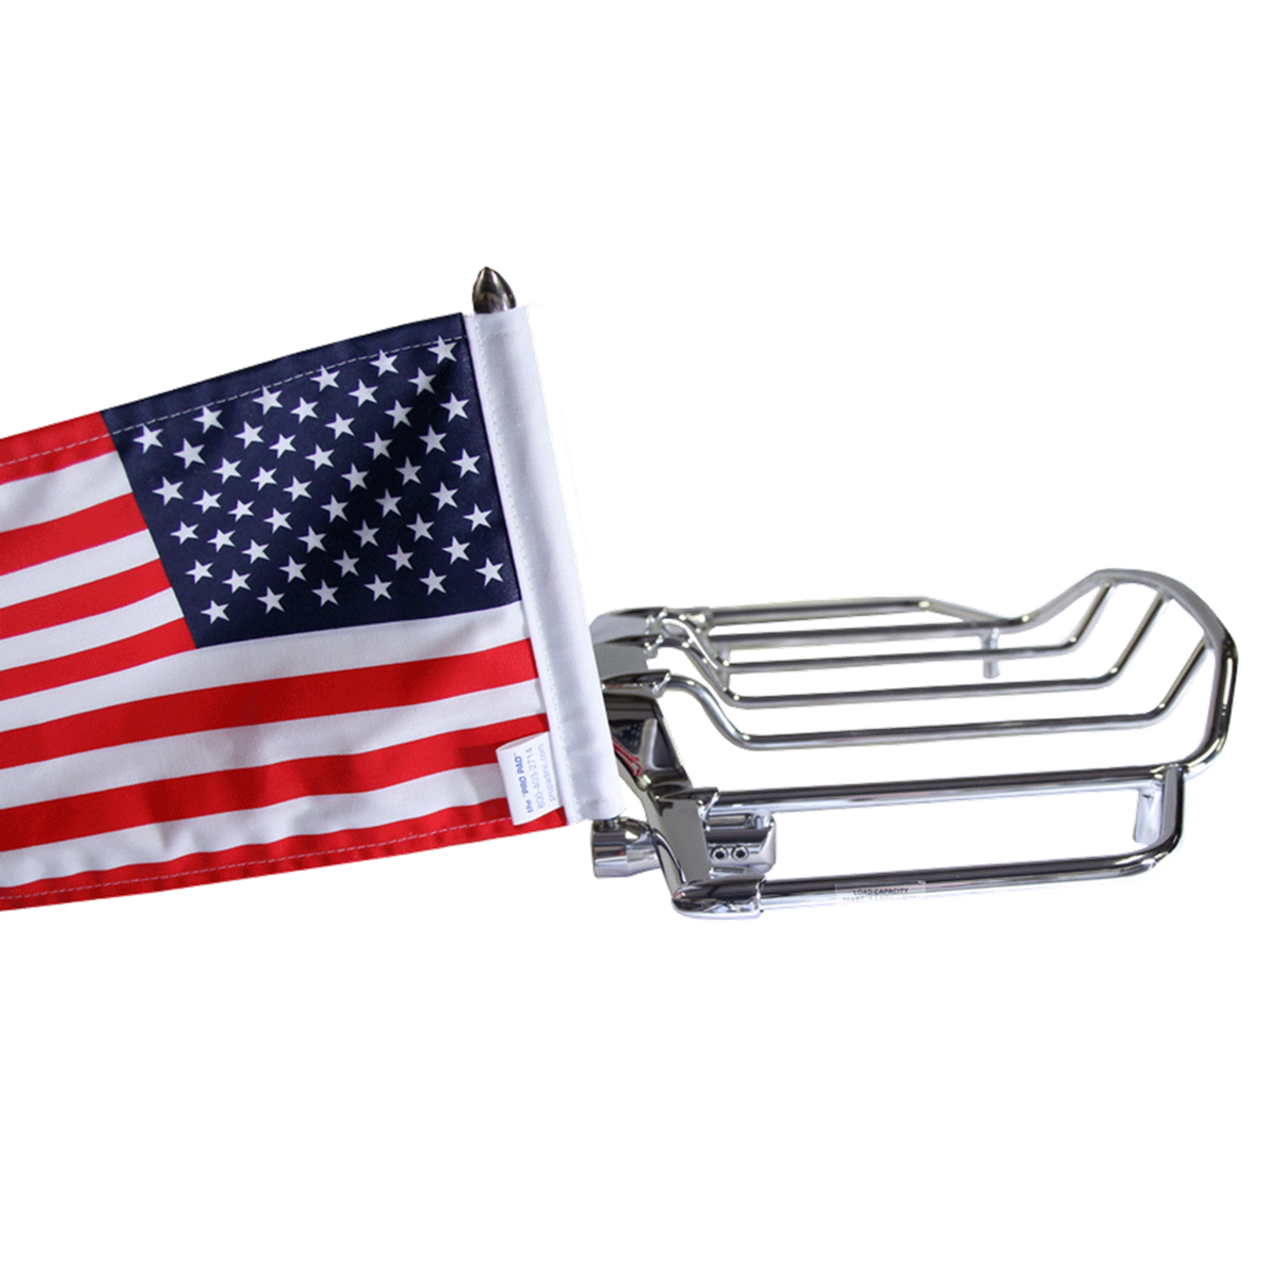 1/2" vertical fit flag mount with 9" pole, standard cone topper and
6"x9" USA flag on Harley Air Wing Rack mounting leg (rack not included)
